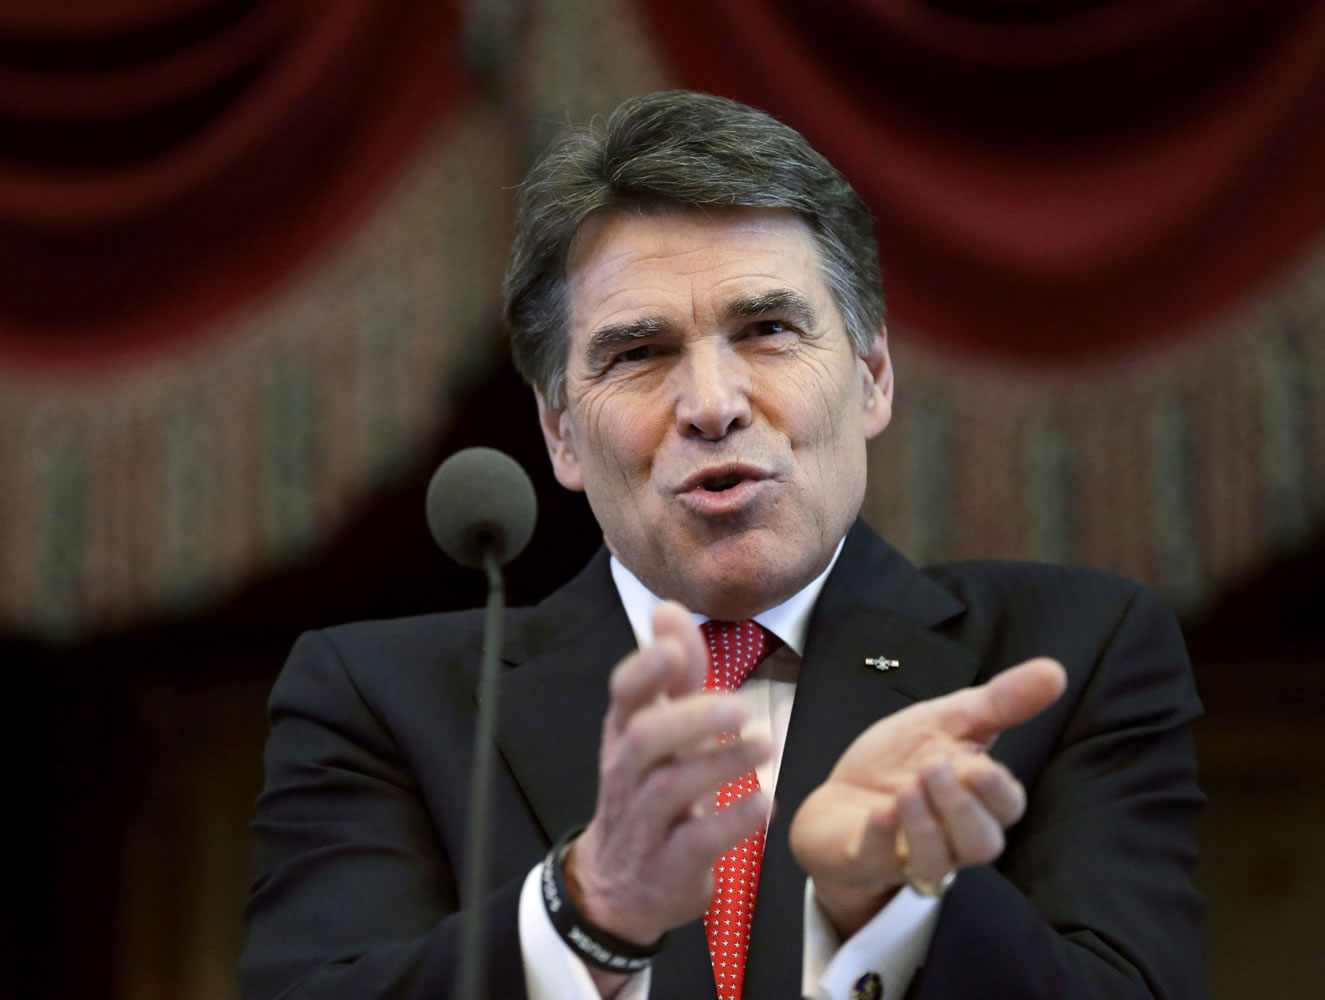 Eric Gay/Associated Press files
Gov. Rick Perry delivers the State of the State address Jan. 29 in the House chambers at the state Capitol in Austin, Texas. Perry is hunting for new businesses to move from California to Texas.